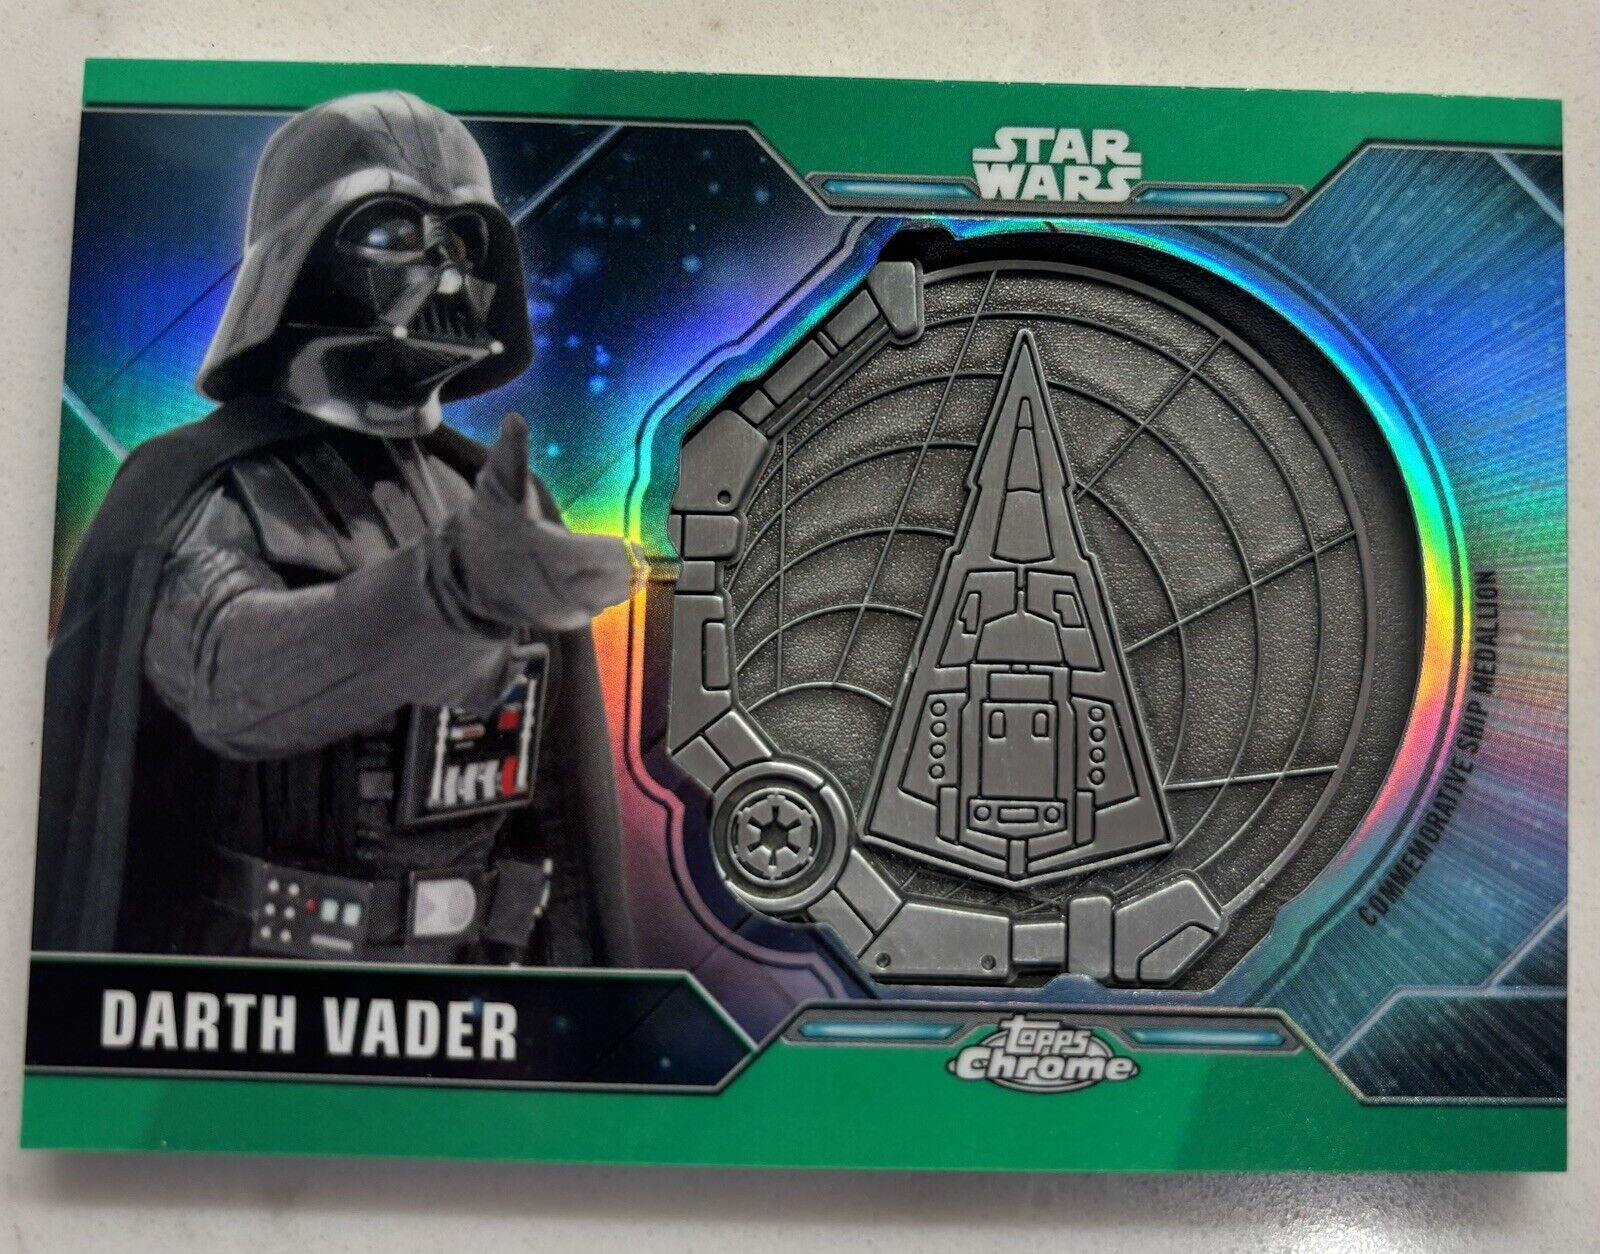 Darth Vader topps chrome Card with Ship Medallion